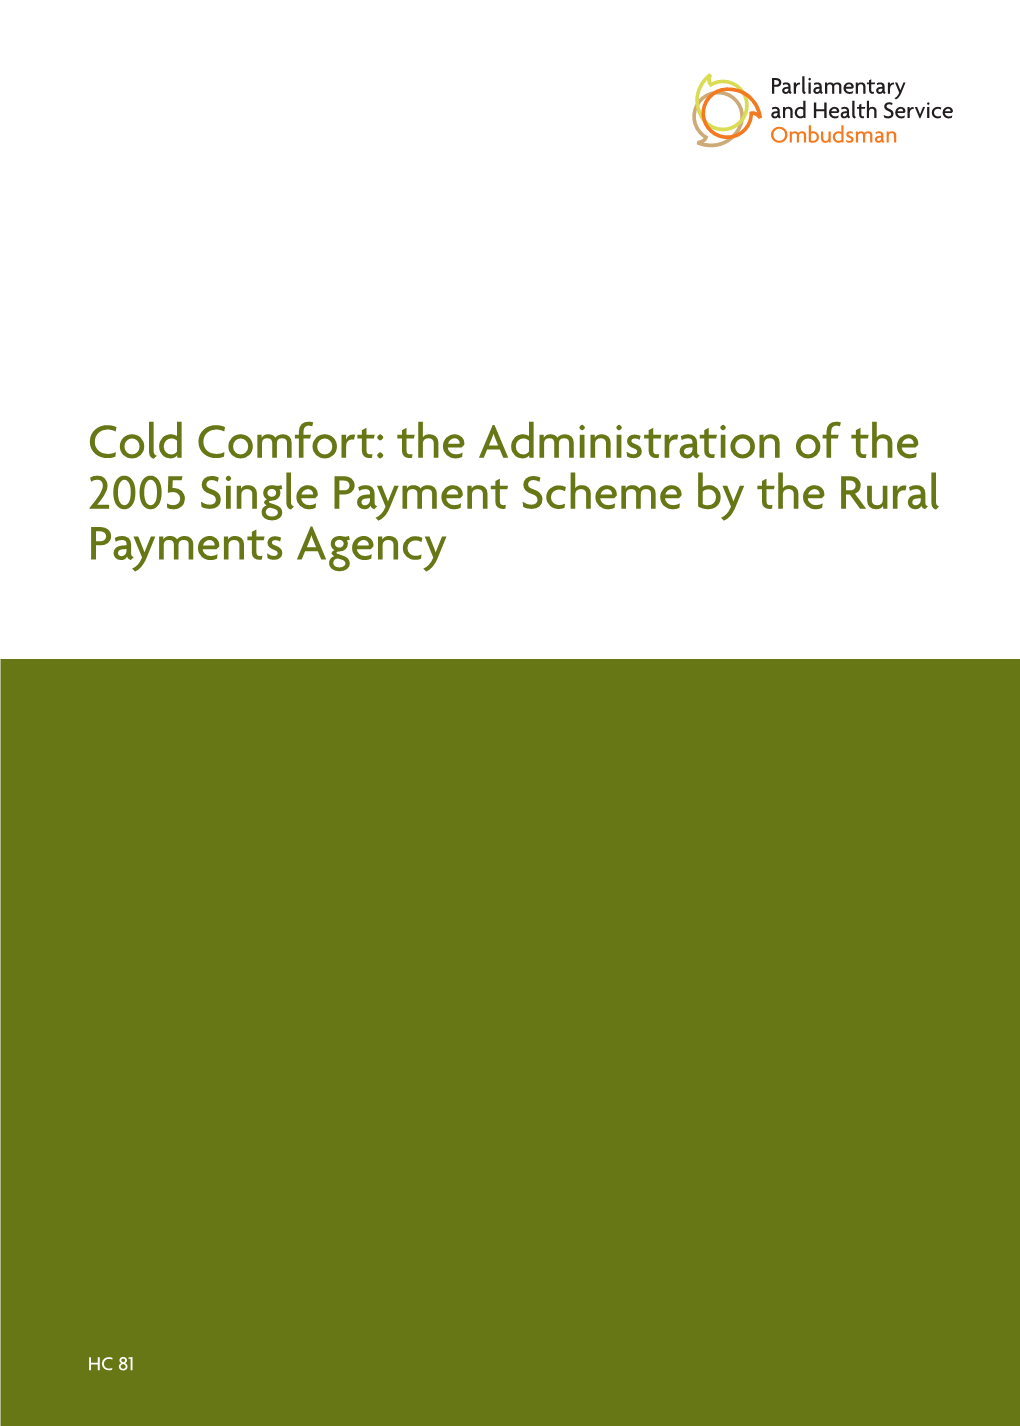 Cold Comfort: the Administration of the 2005 Single Payment Scheme by the Rural Payments Agency